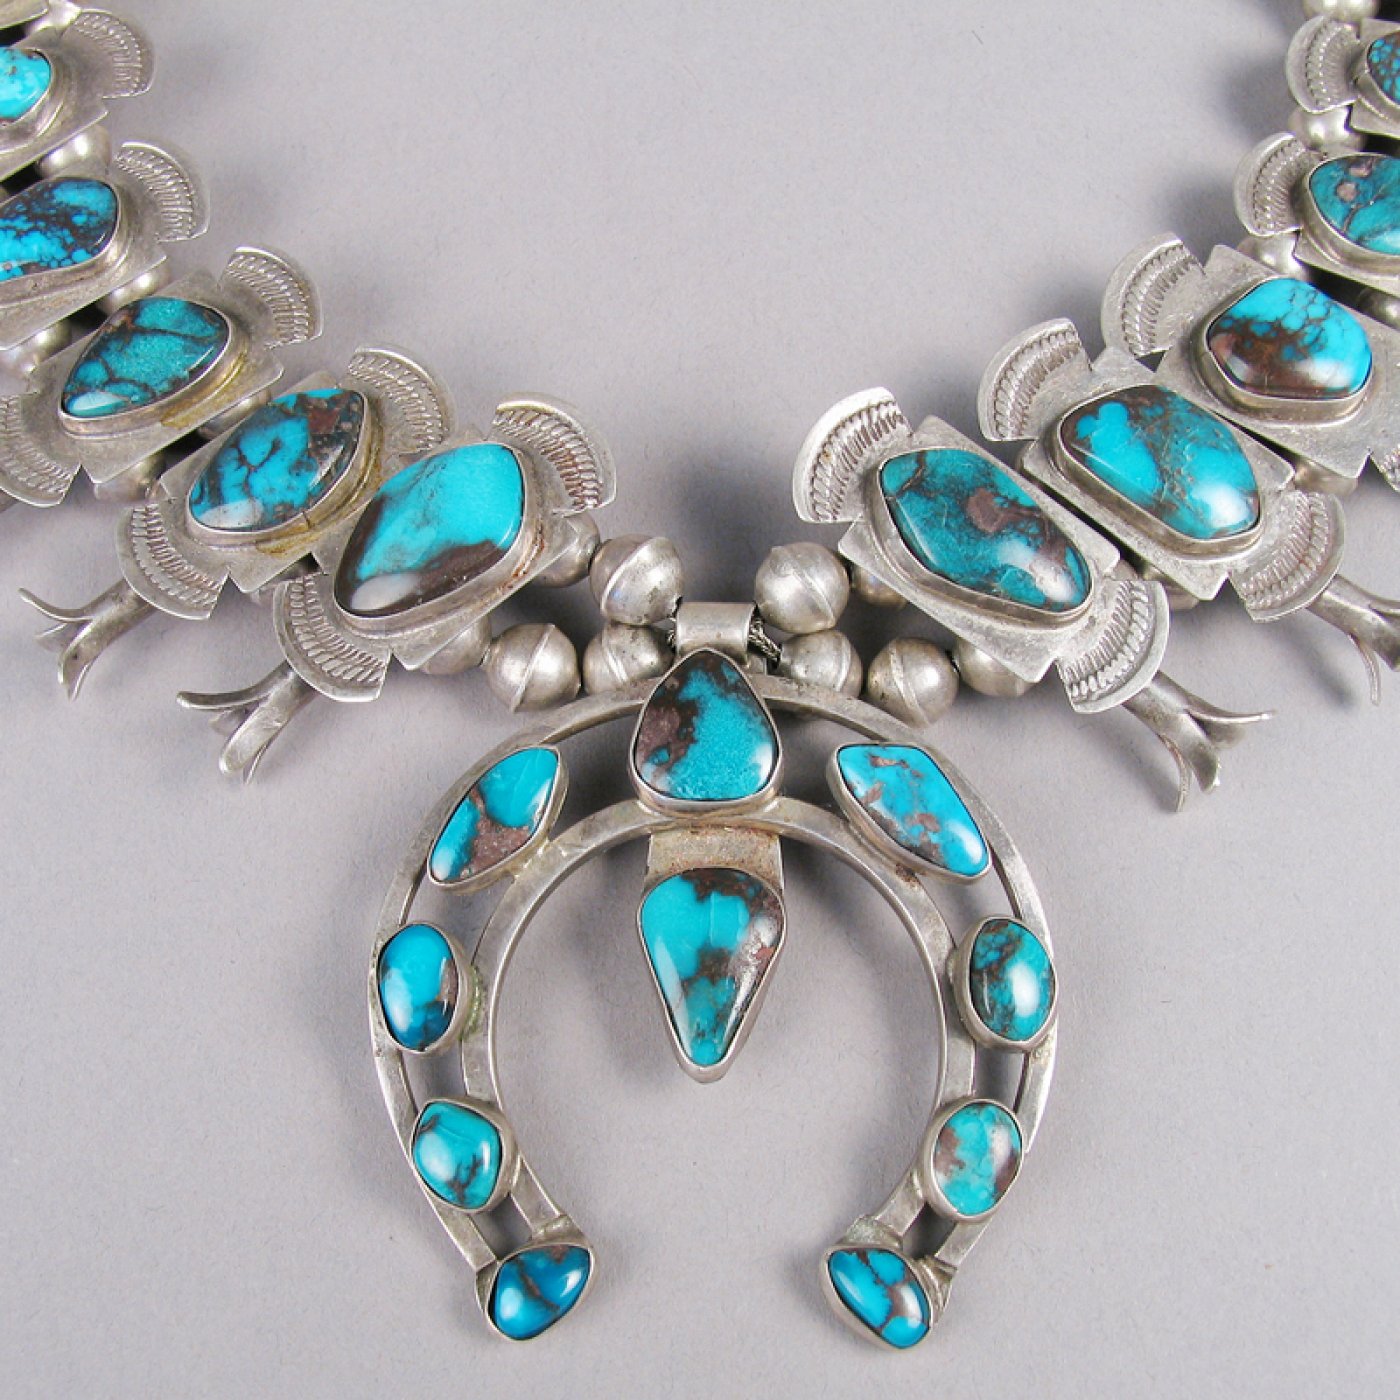 Squash Blossom Necklace with Bisbee Turquoise, c.1950 | Shiprock Santa Fe